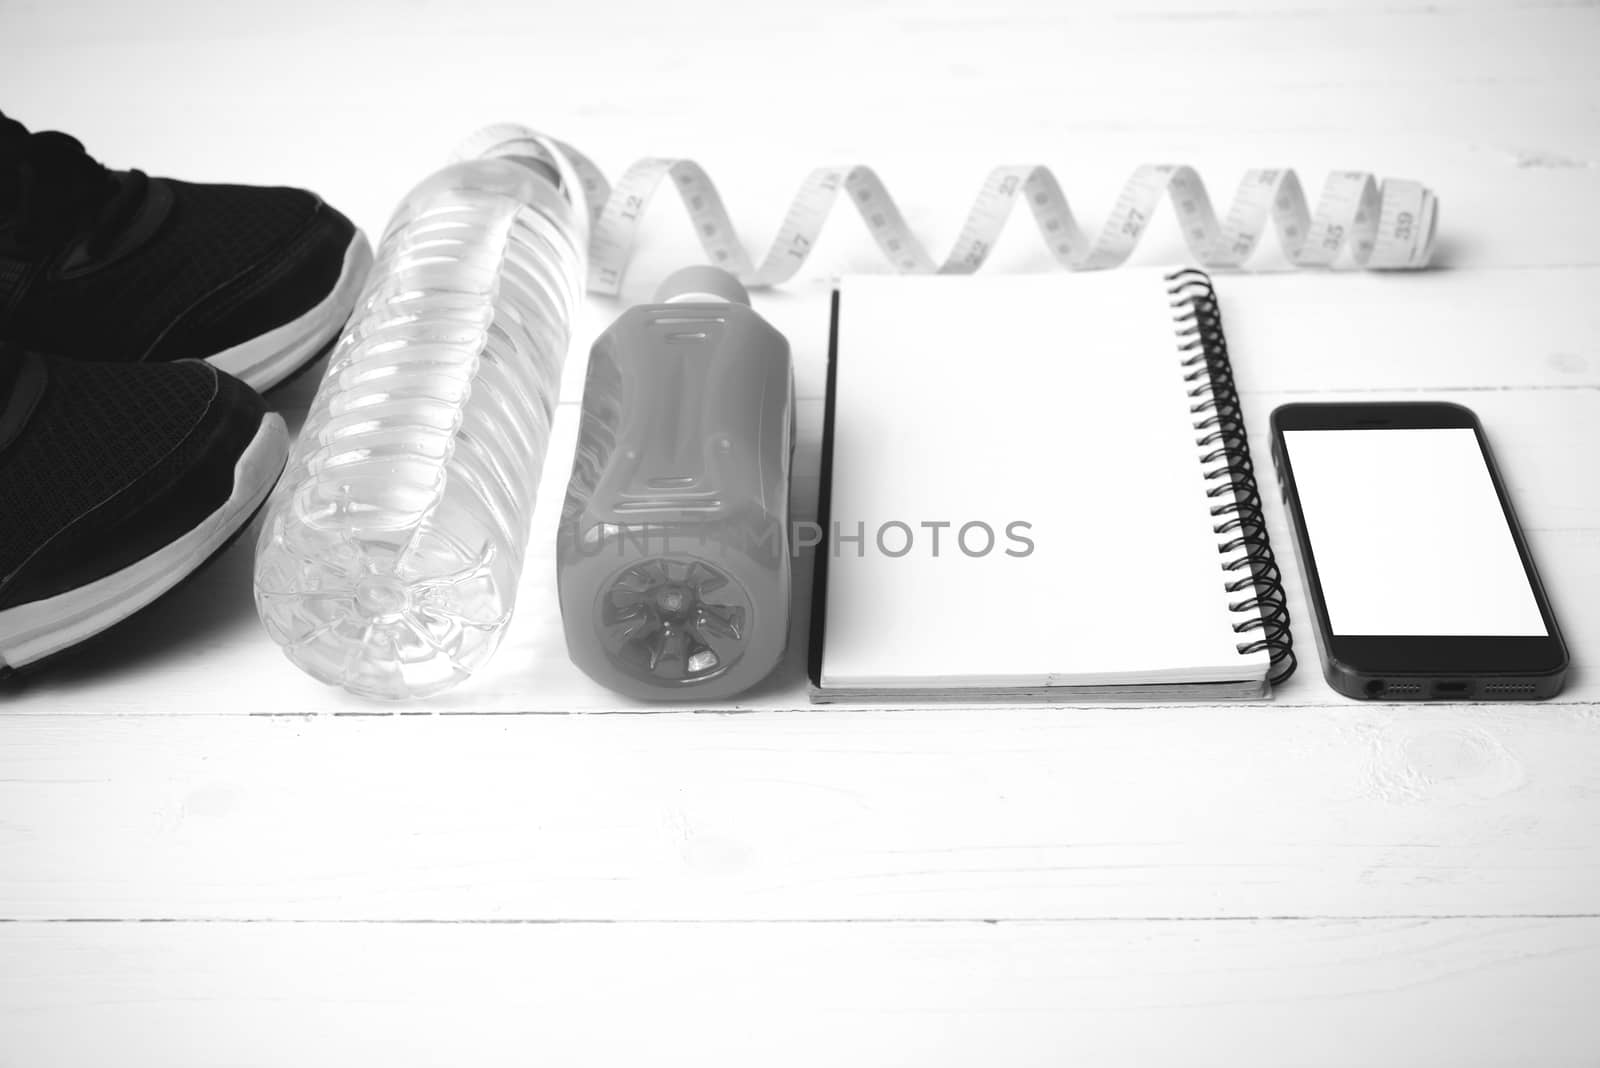 fitness equipment:running shoes,water,measuring tape,notepad,phone and juice on white wood background black and white color